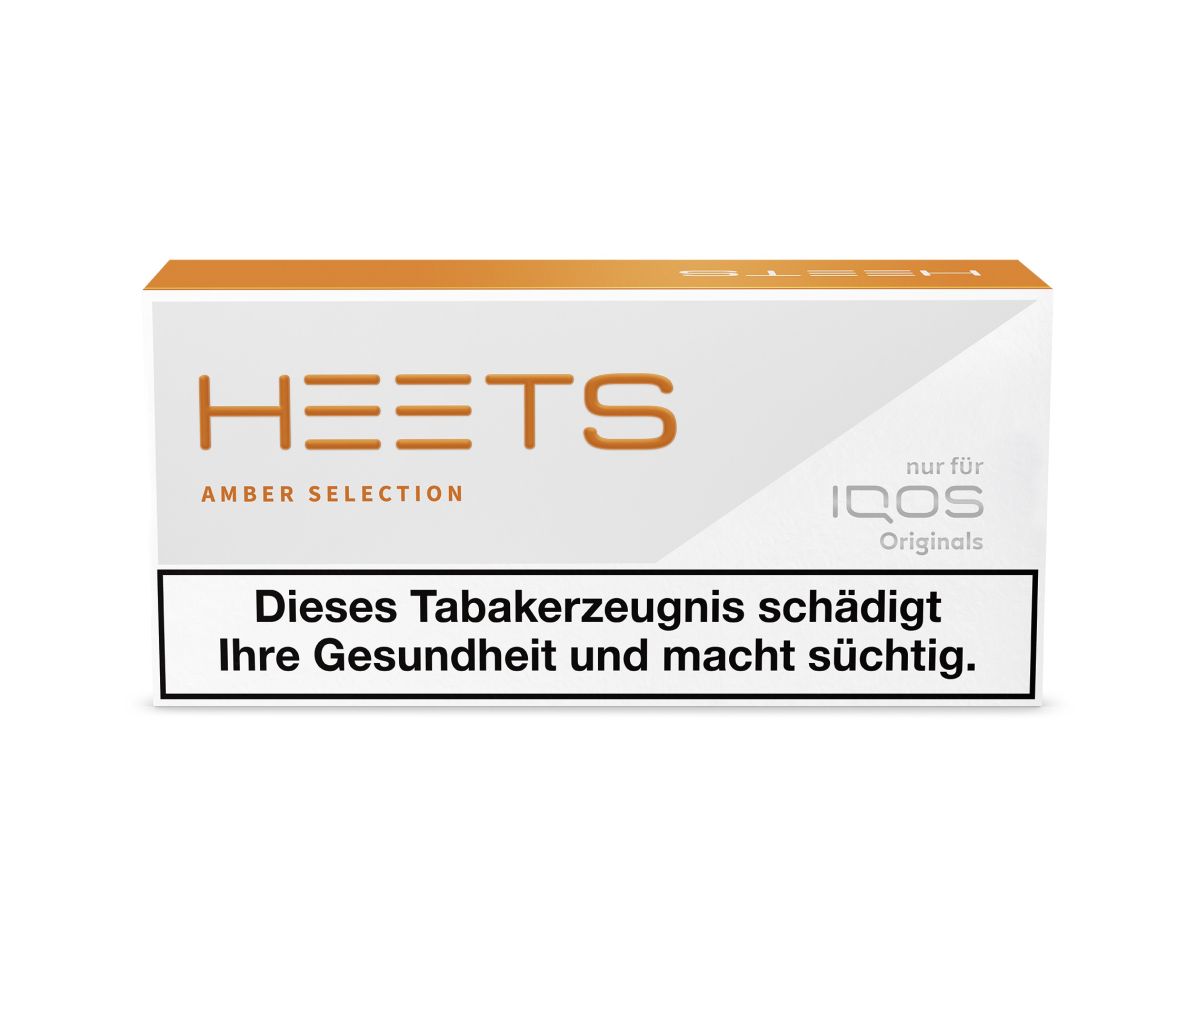 HEETS HEETS IQOS Amber Selection 6g bei www.Tabakring.de kaufen